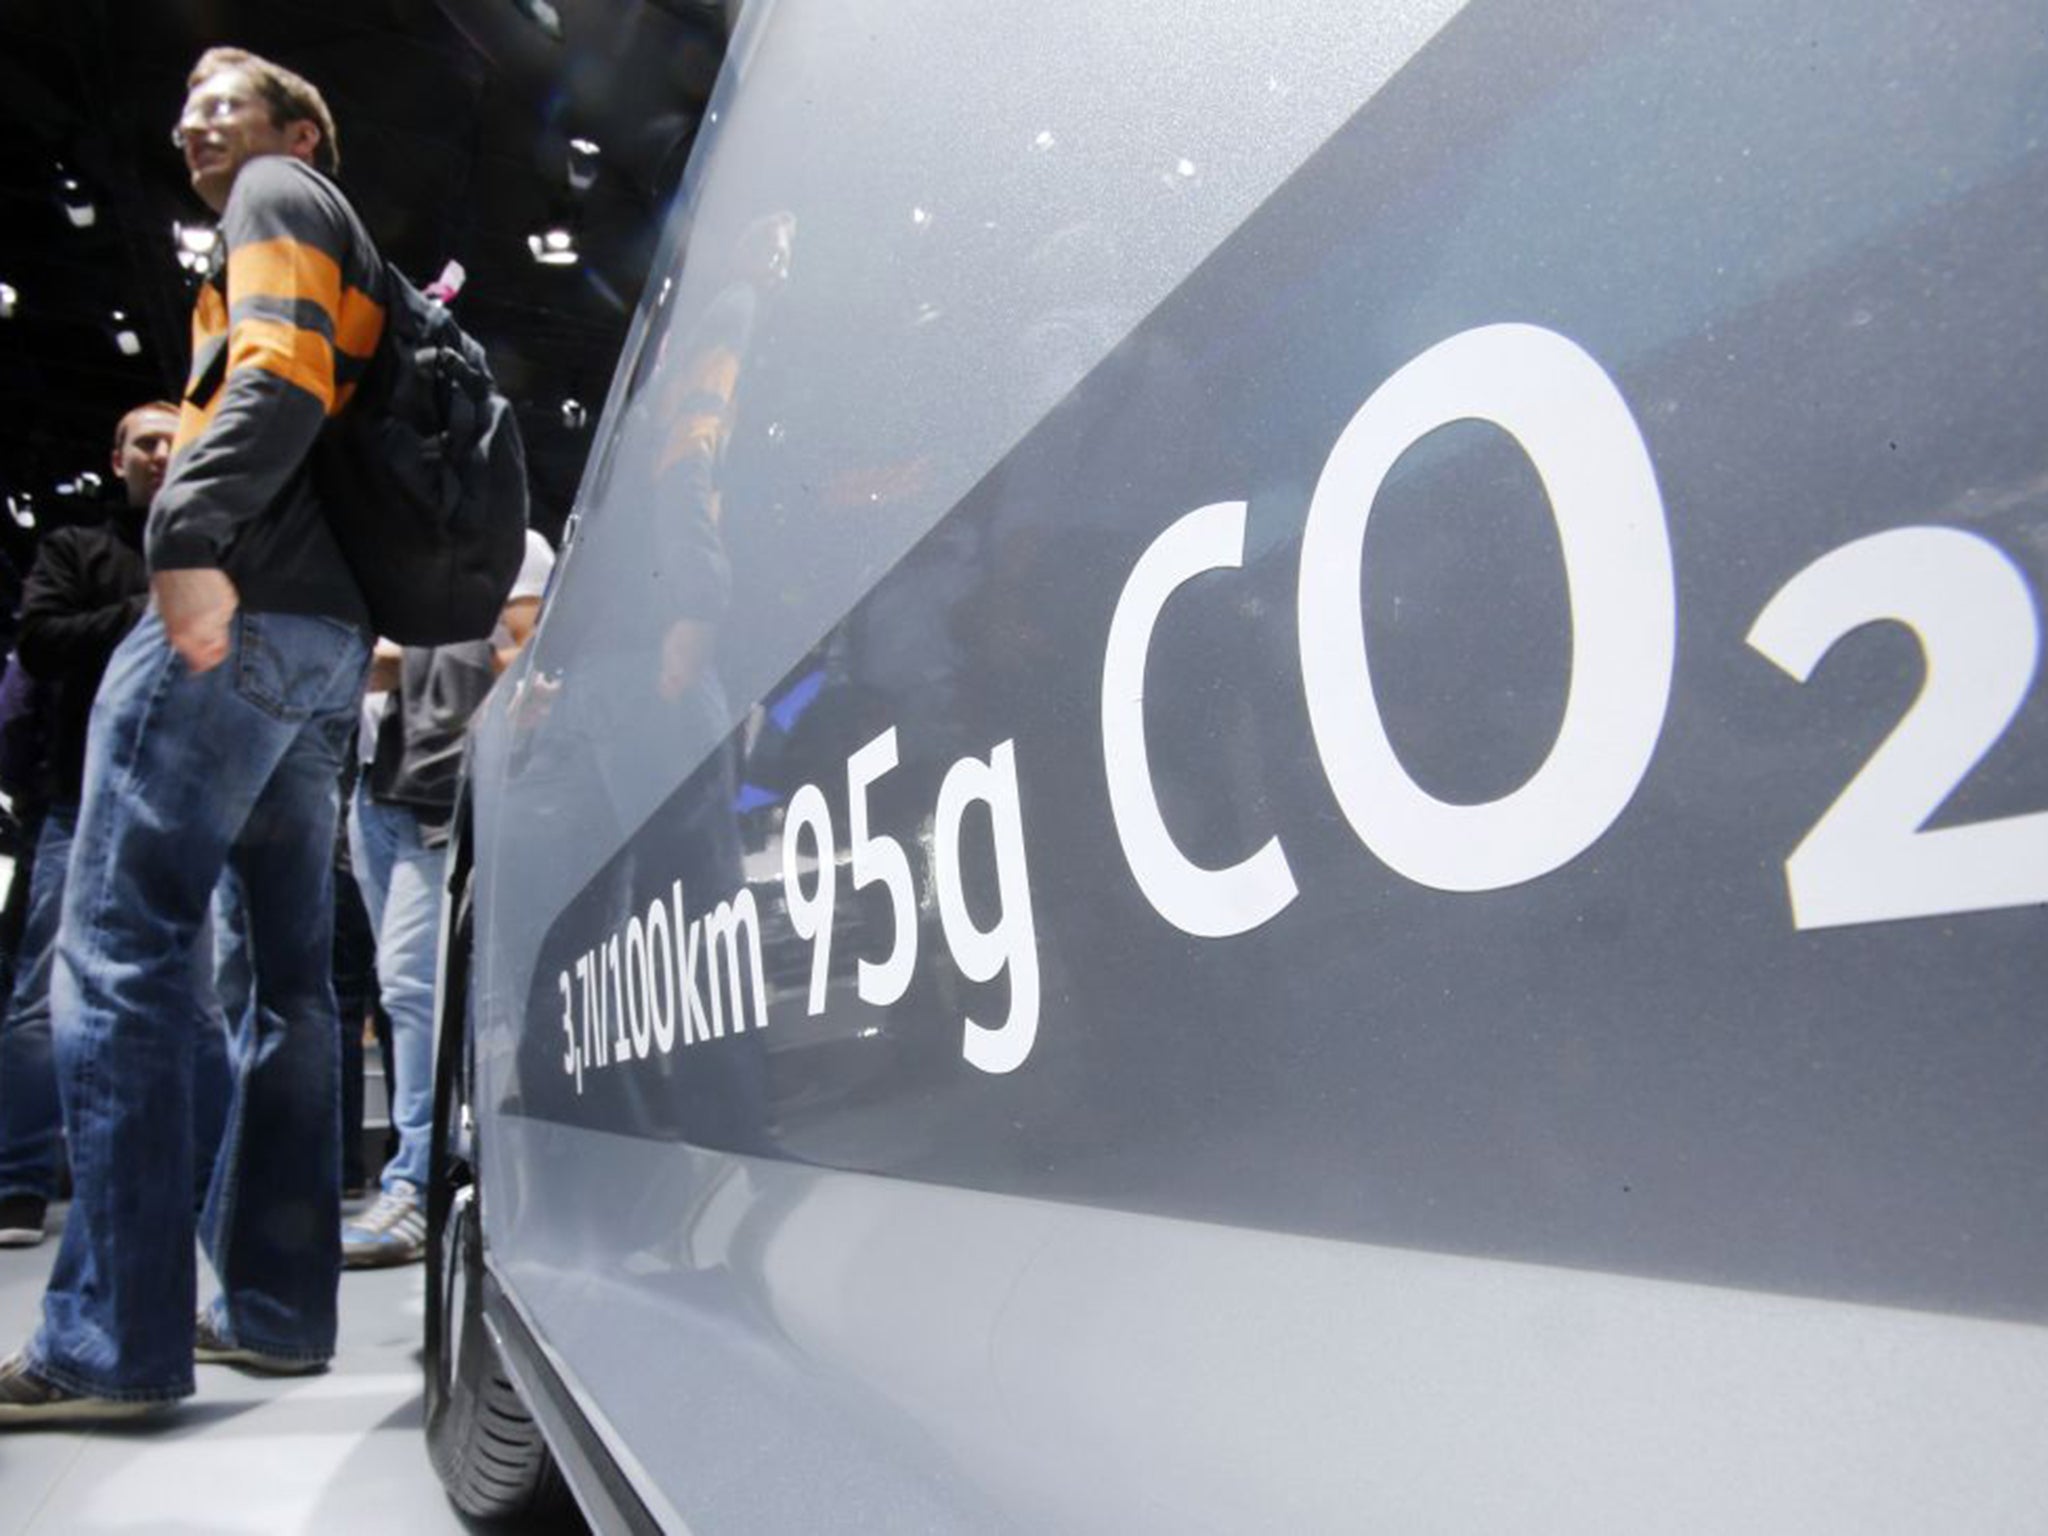 &#13;
Campaigners say the current EU legislation has permitted large car makers to continue producing high-CO2-emitting vehicles in exchange for producing a small number of lower emissions ones &#13;